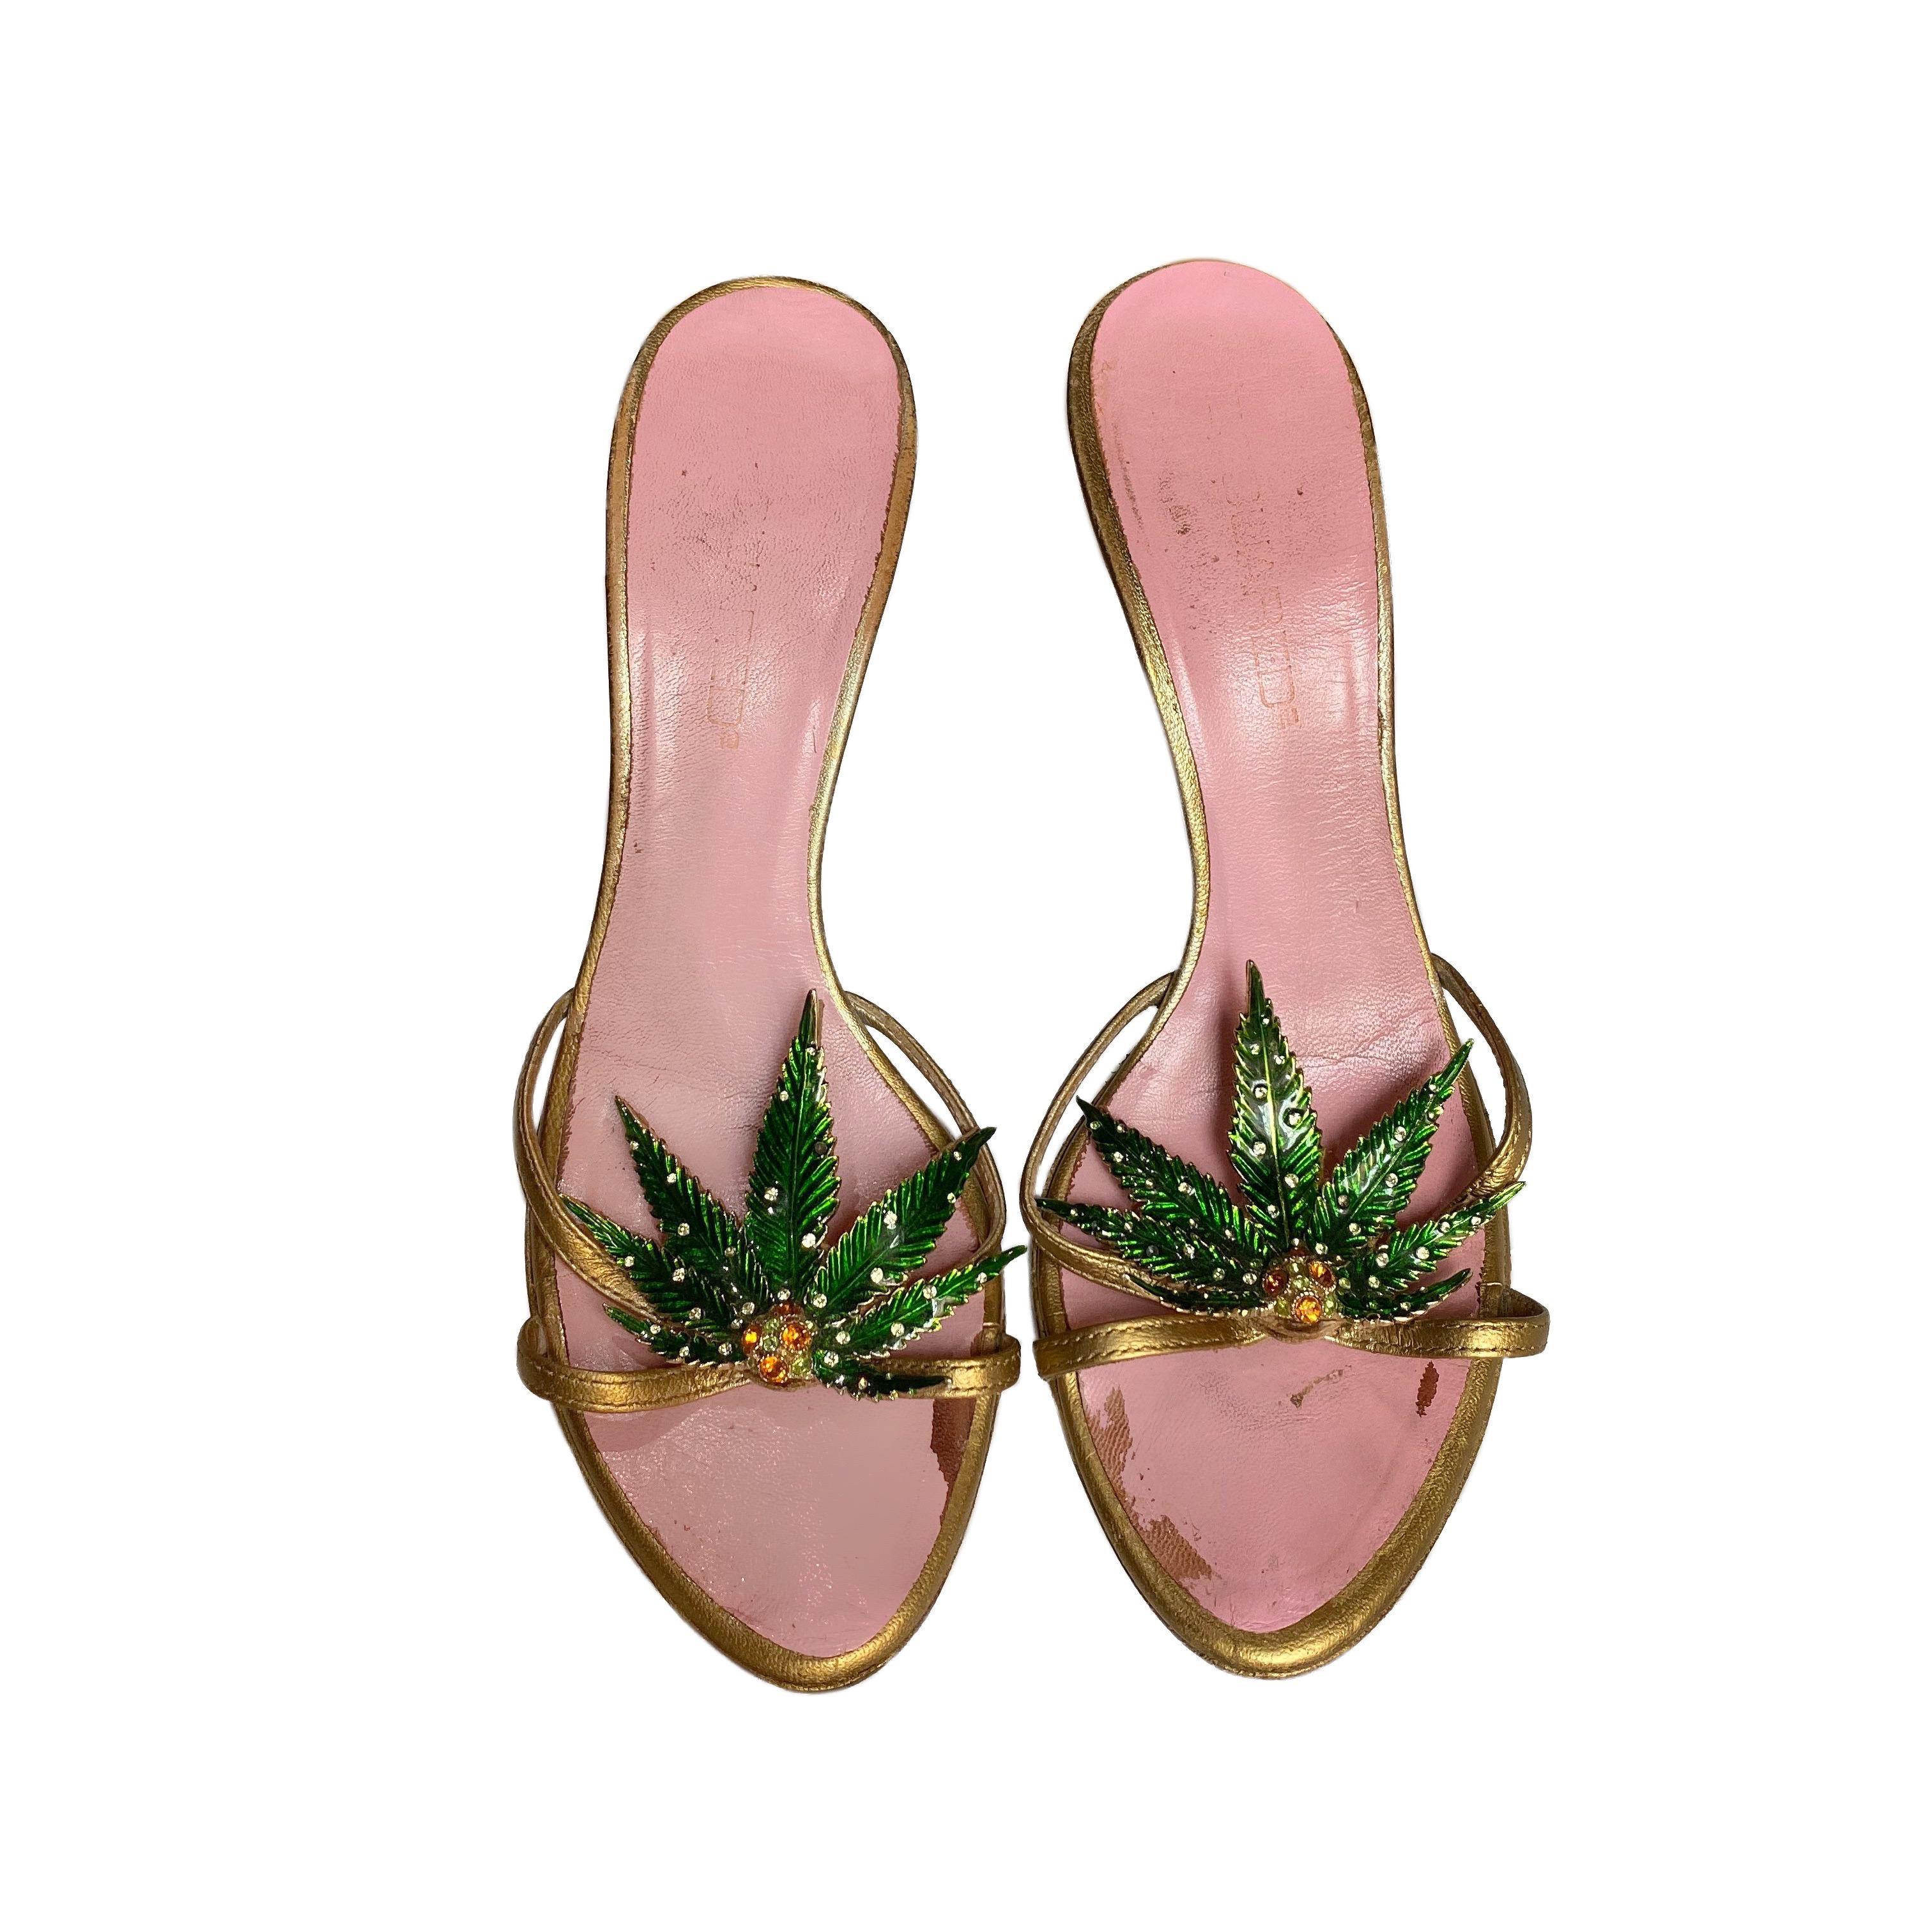 Dsquared2 gold leather heels with green metal Marijuana leaf Plaque with rhinestones from the Spring/Summer 2005 collections. Similar version featured on the runway.

Size 36

The item has some scratches on the heel and inner sole (pictured), it has